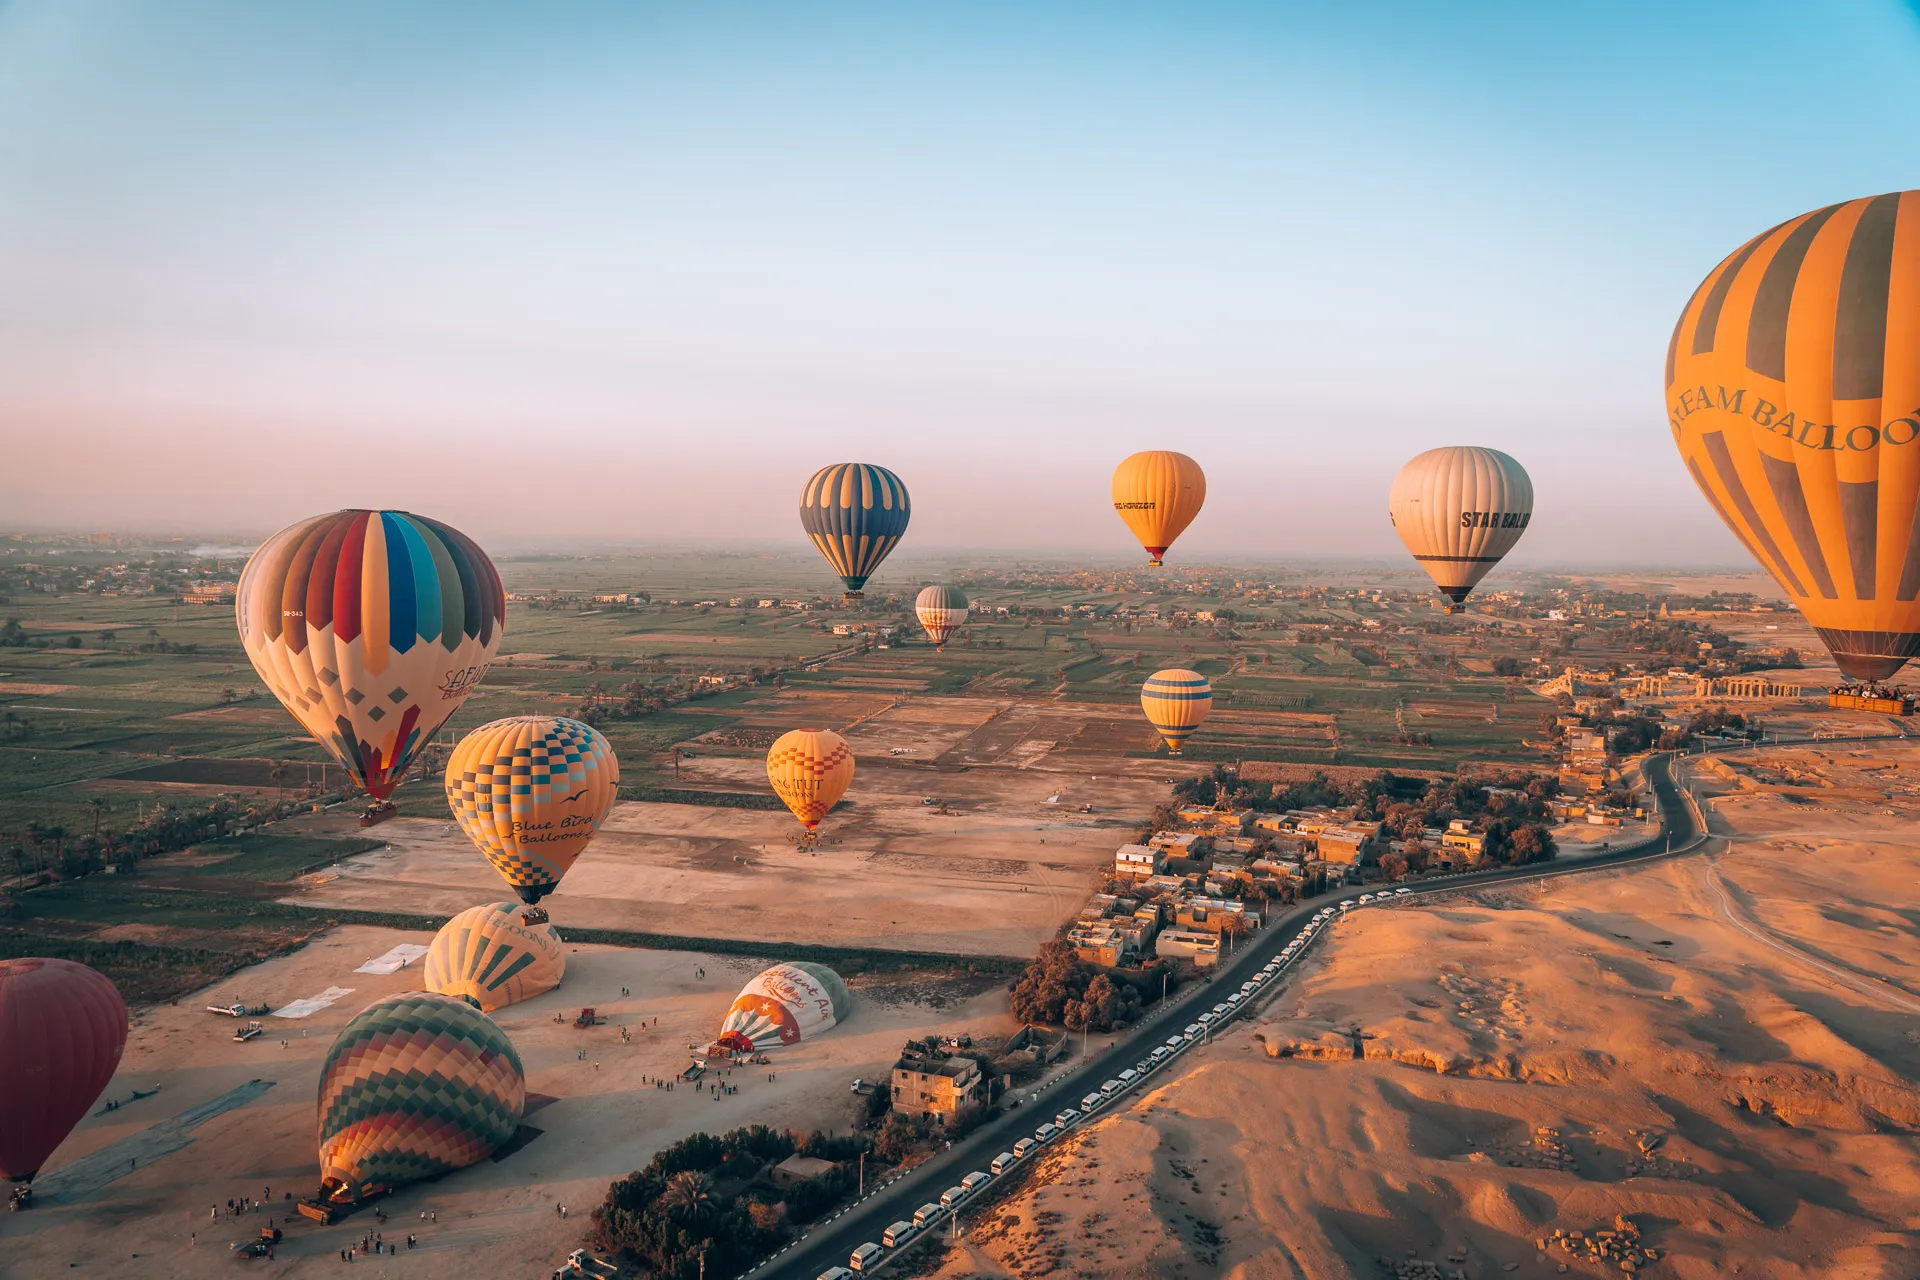 50 balloon flights take off in the skies of Luxor and a commitment not to fly east of the Nile